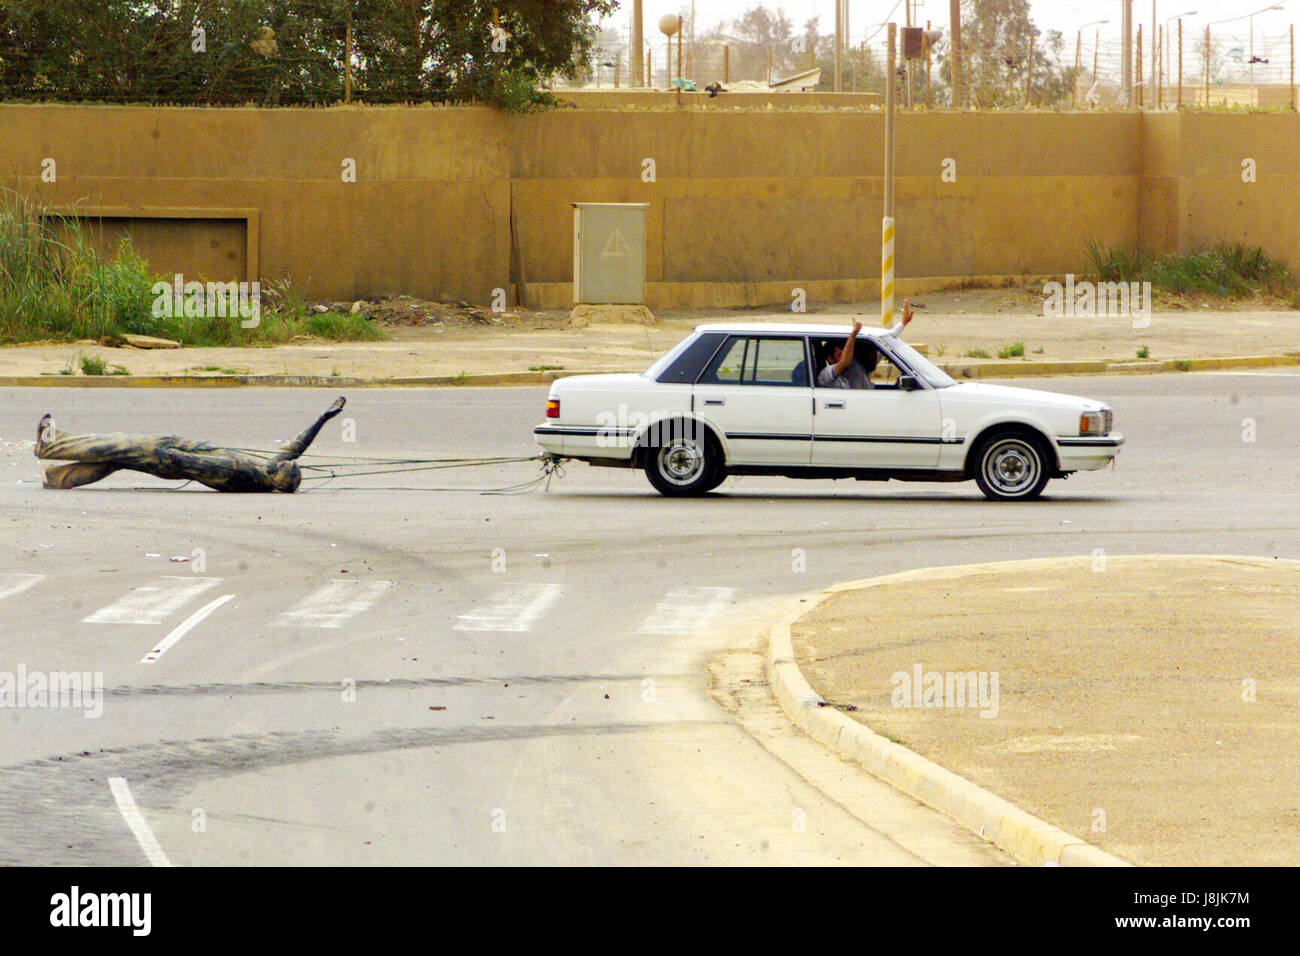 Using a car, Iraqi civilians drag a statue of Saddam Hussein down the streets of Baghdad, Iraq, during Operation IRAQI FREEDOM. Stock Photo